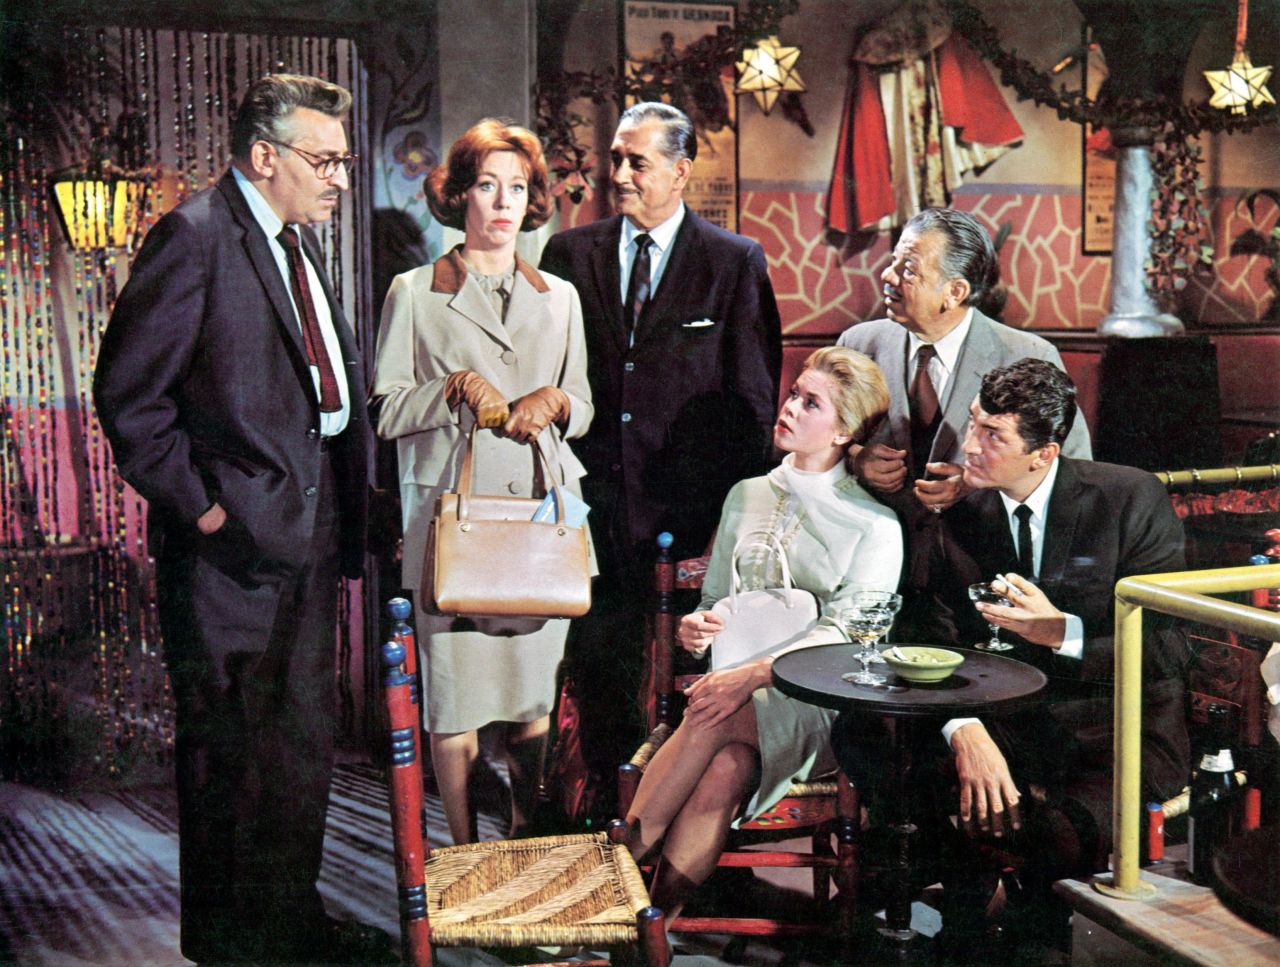 Burnett made her film debut in 1963's "Who's Been Sleeping in My Bed?"